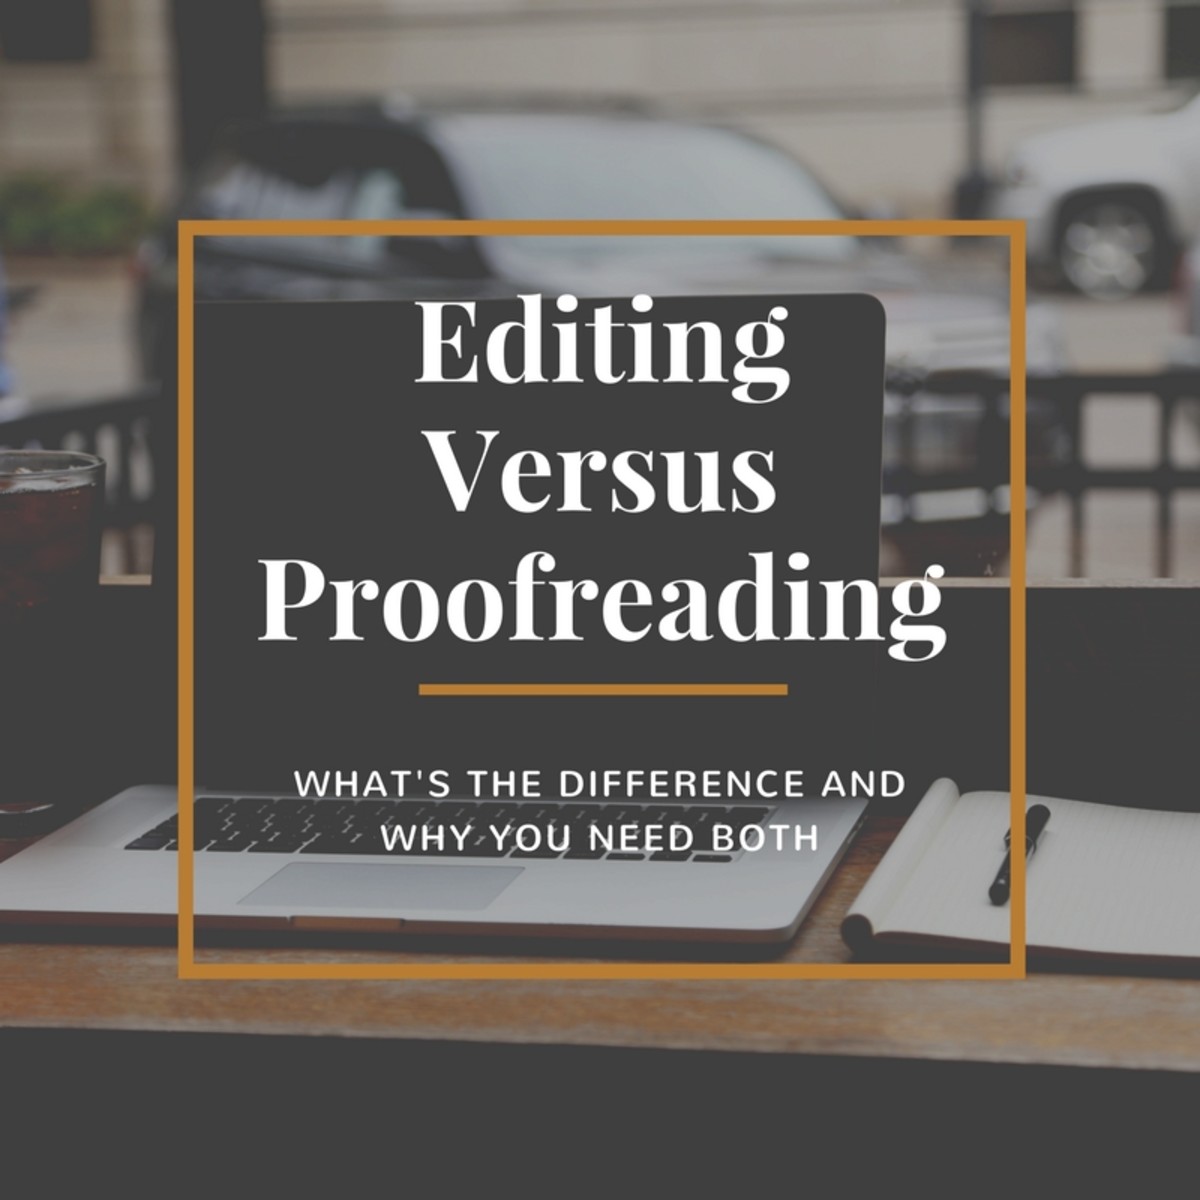 Professional Editing and Proofreading Service